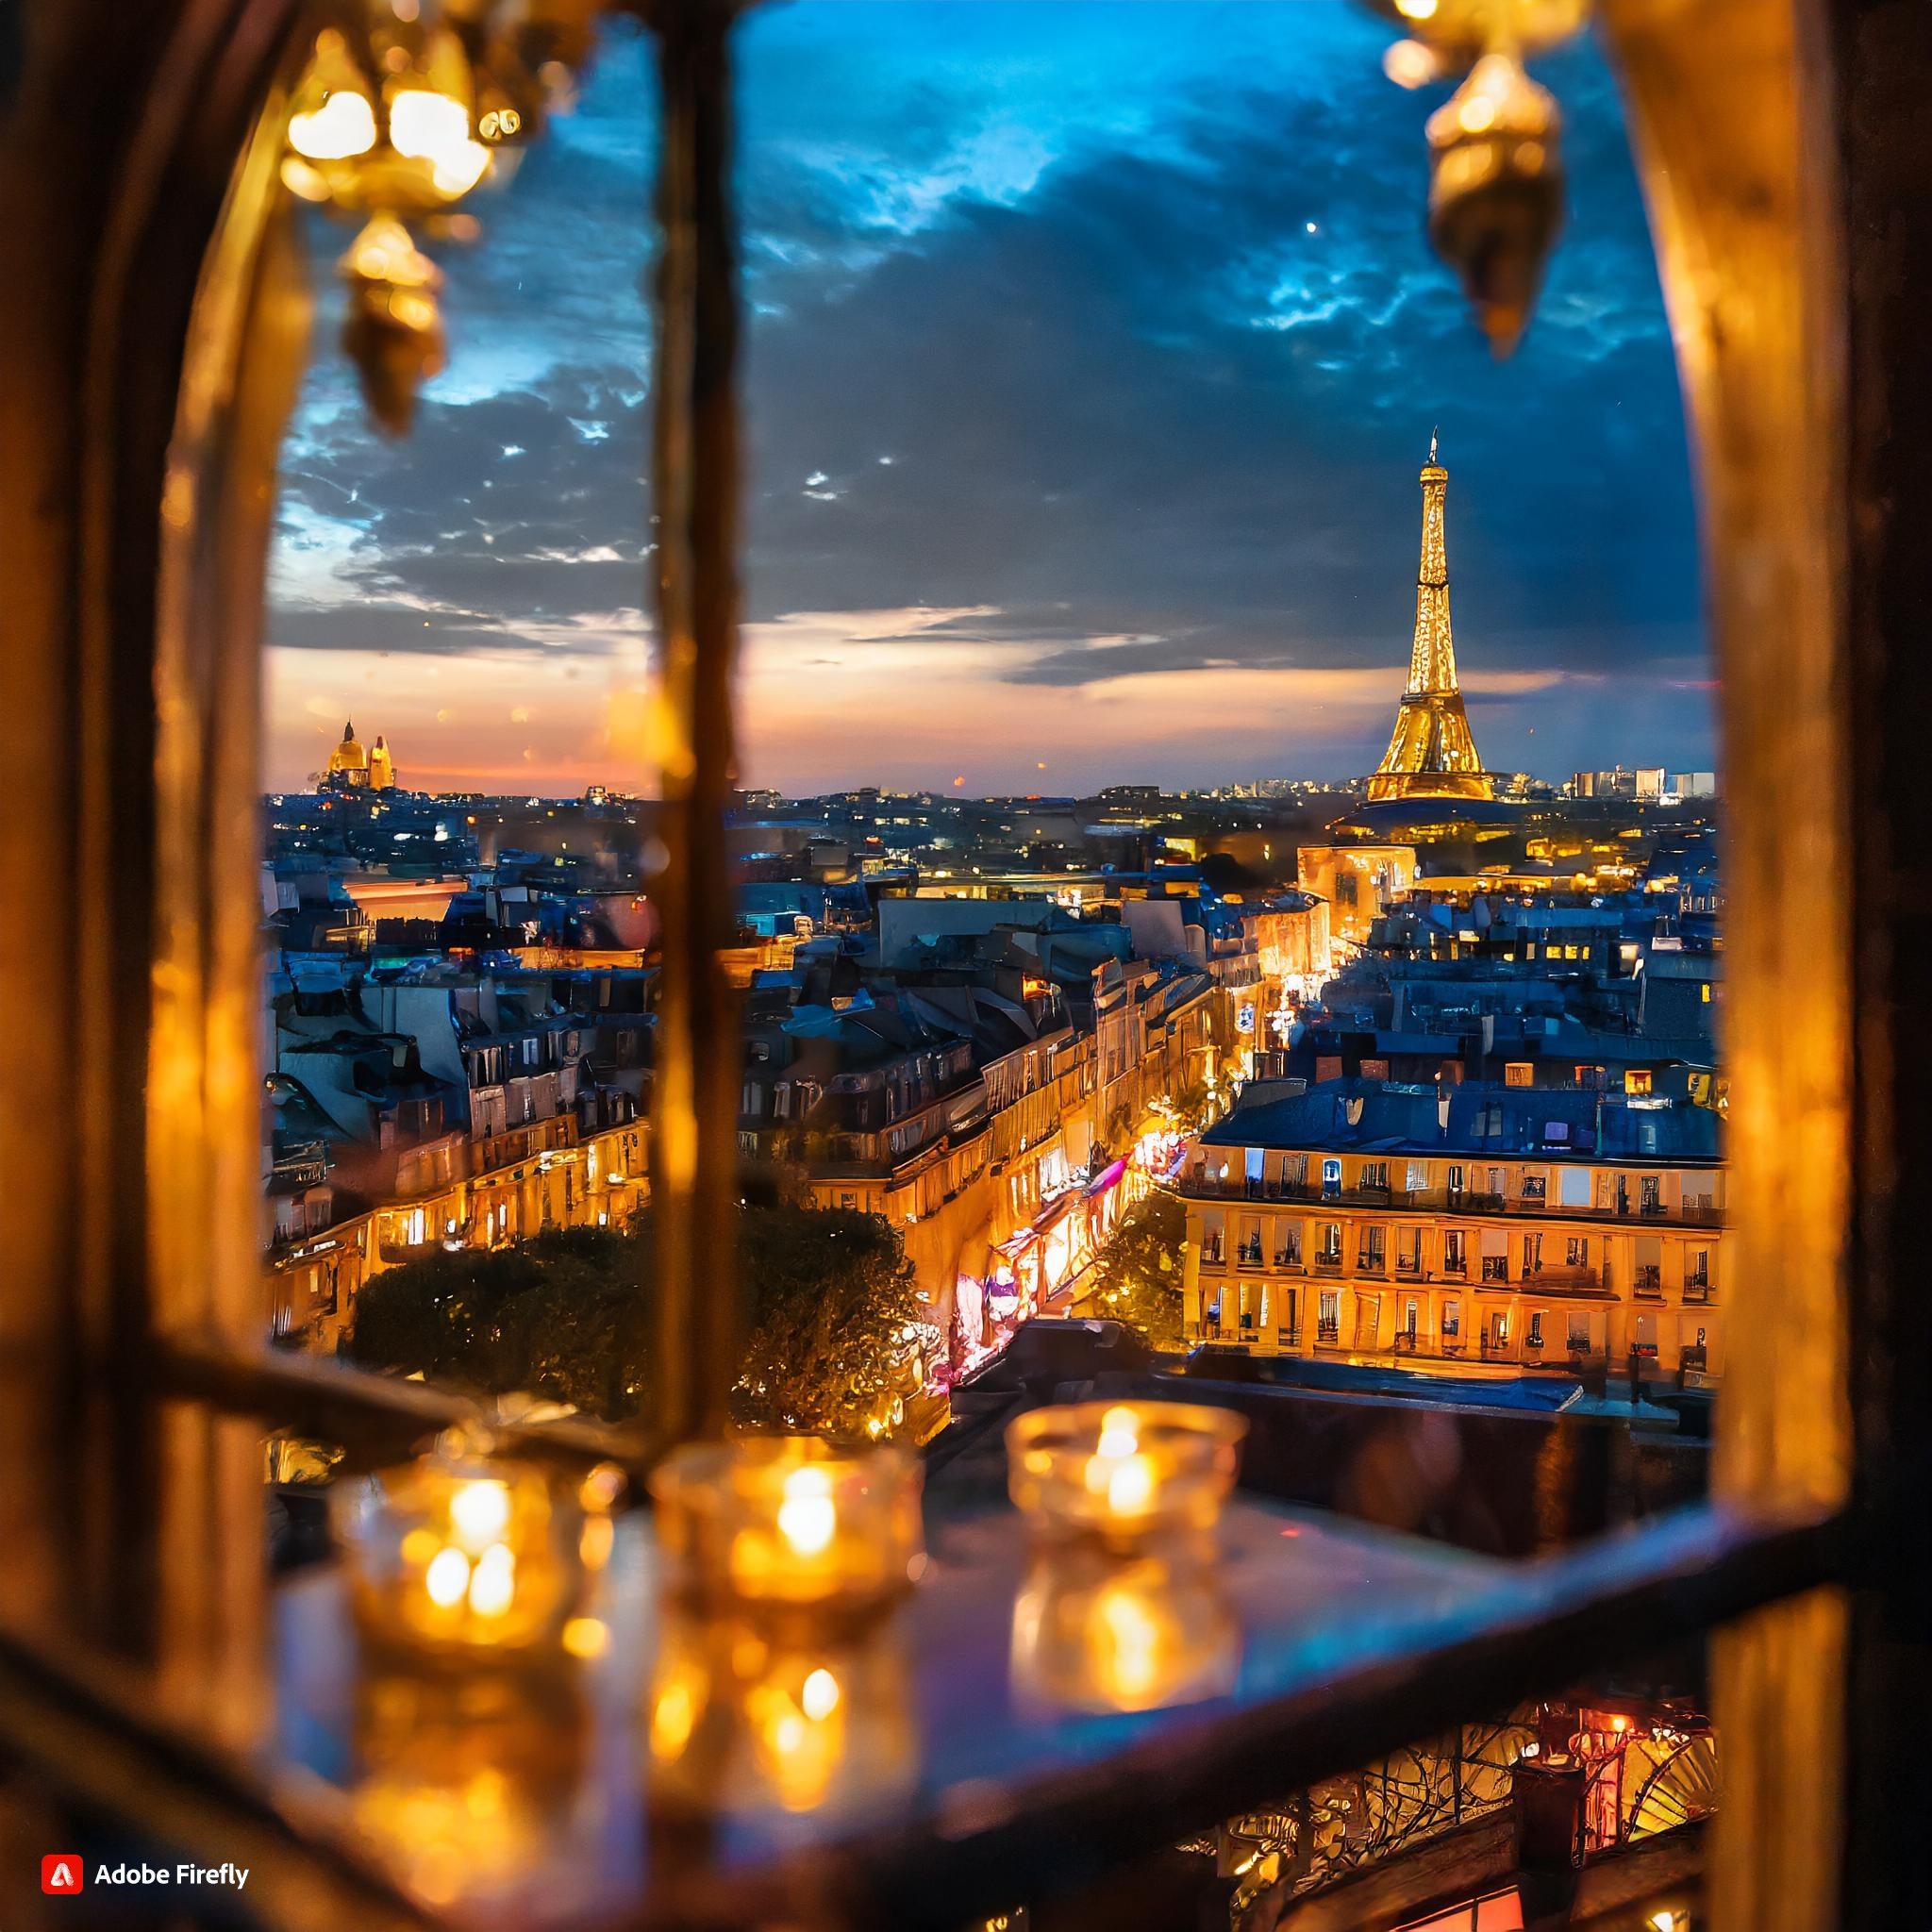 Firefly the Eiffel tower in Paris with glowing lights all from the view of a resturaunt window. jpg